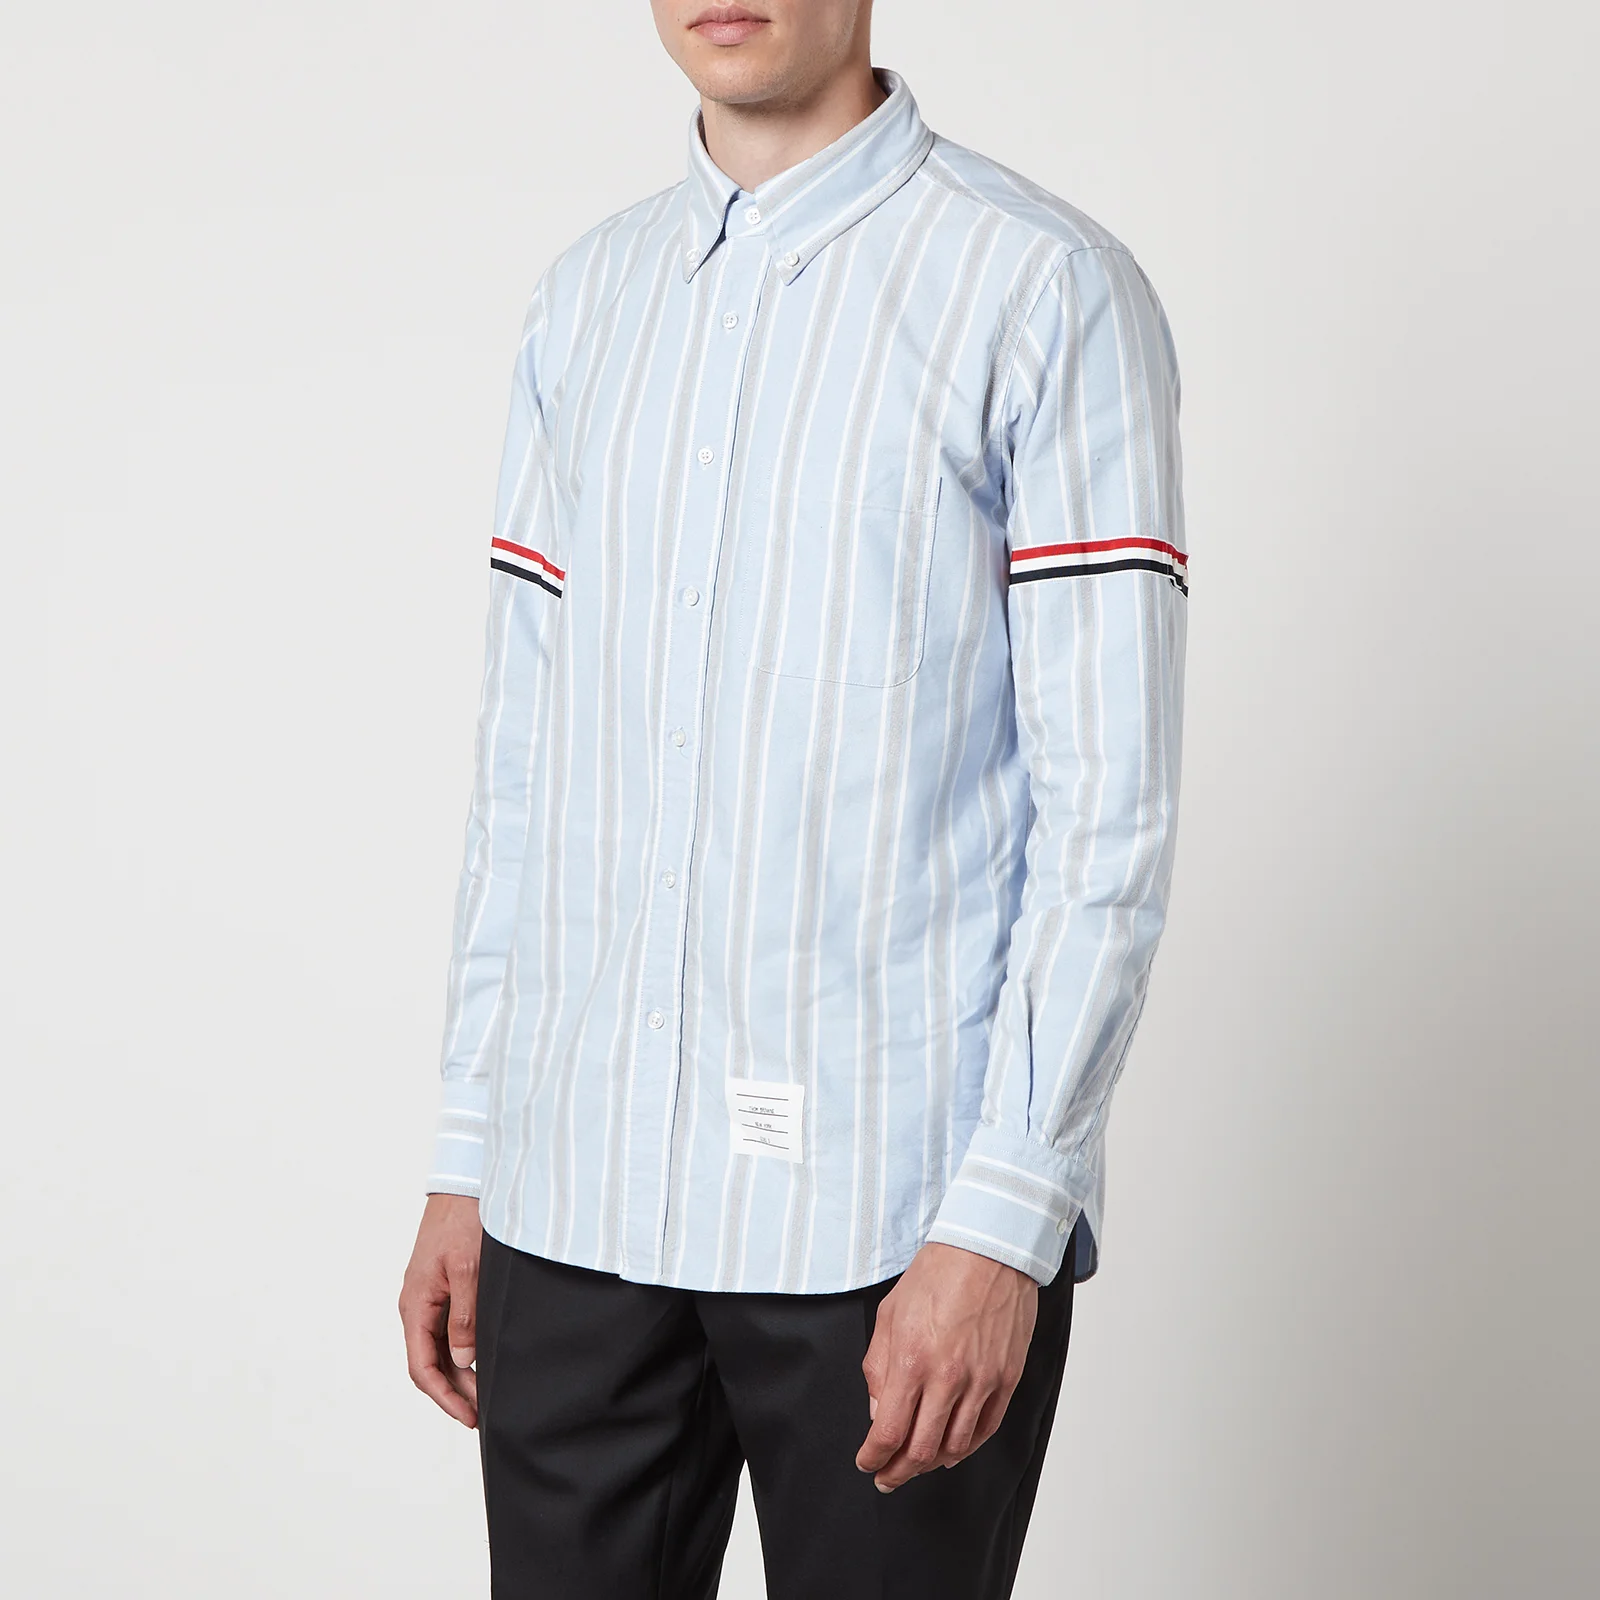 Thom Browne Straight Fit Striped Oxford Striped Shirt Image 1